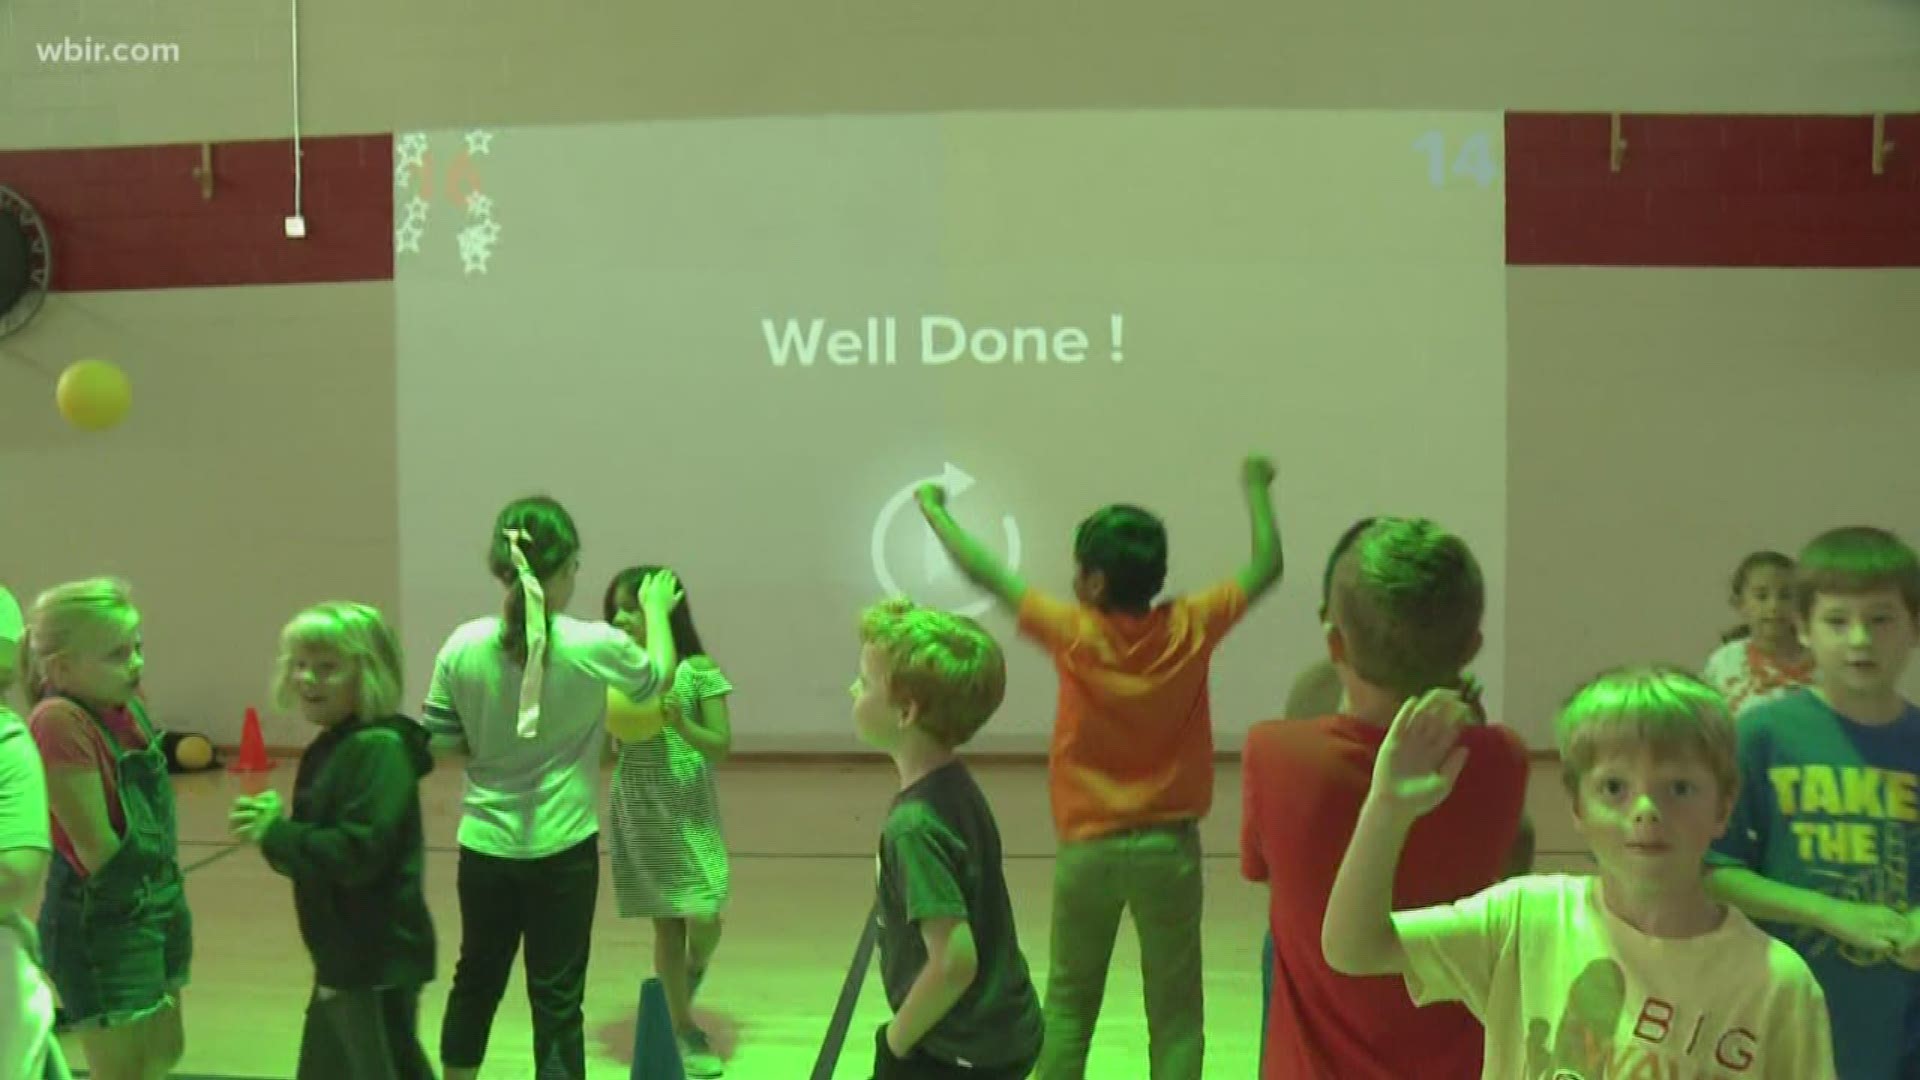 New technology at John Sevier Elementary School turns physical education class into an interactive and fun learning experience.